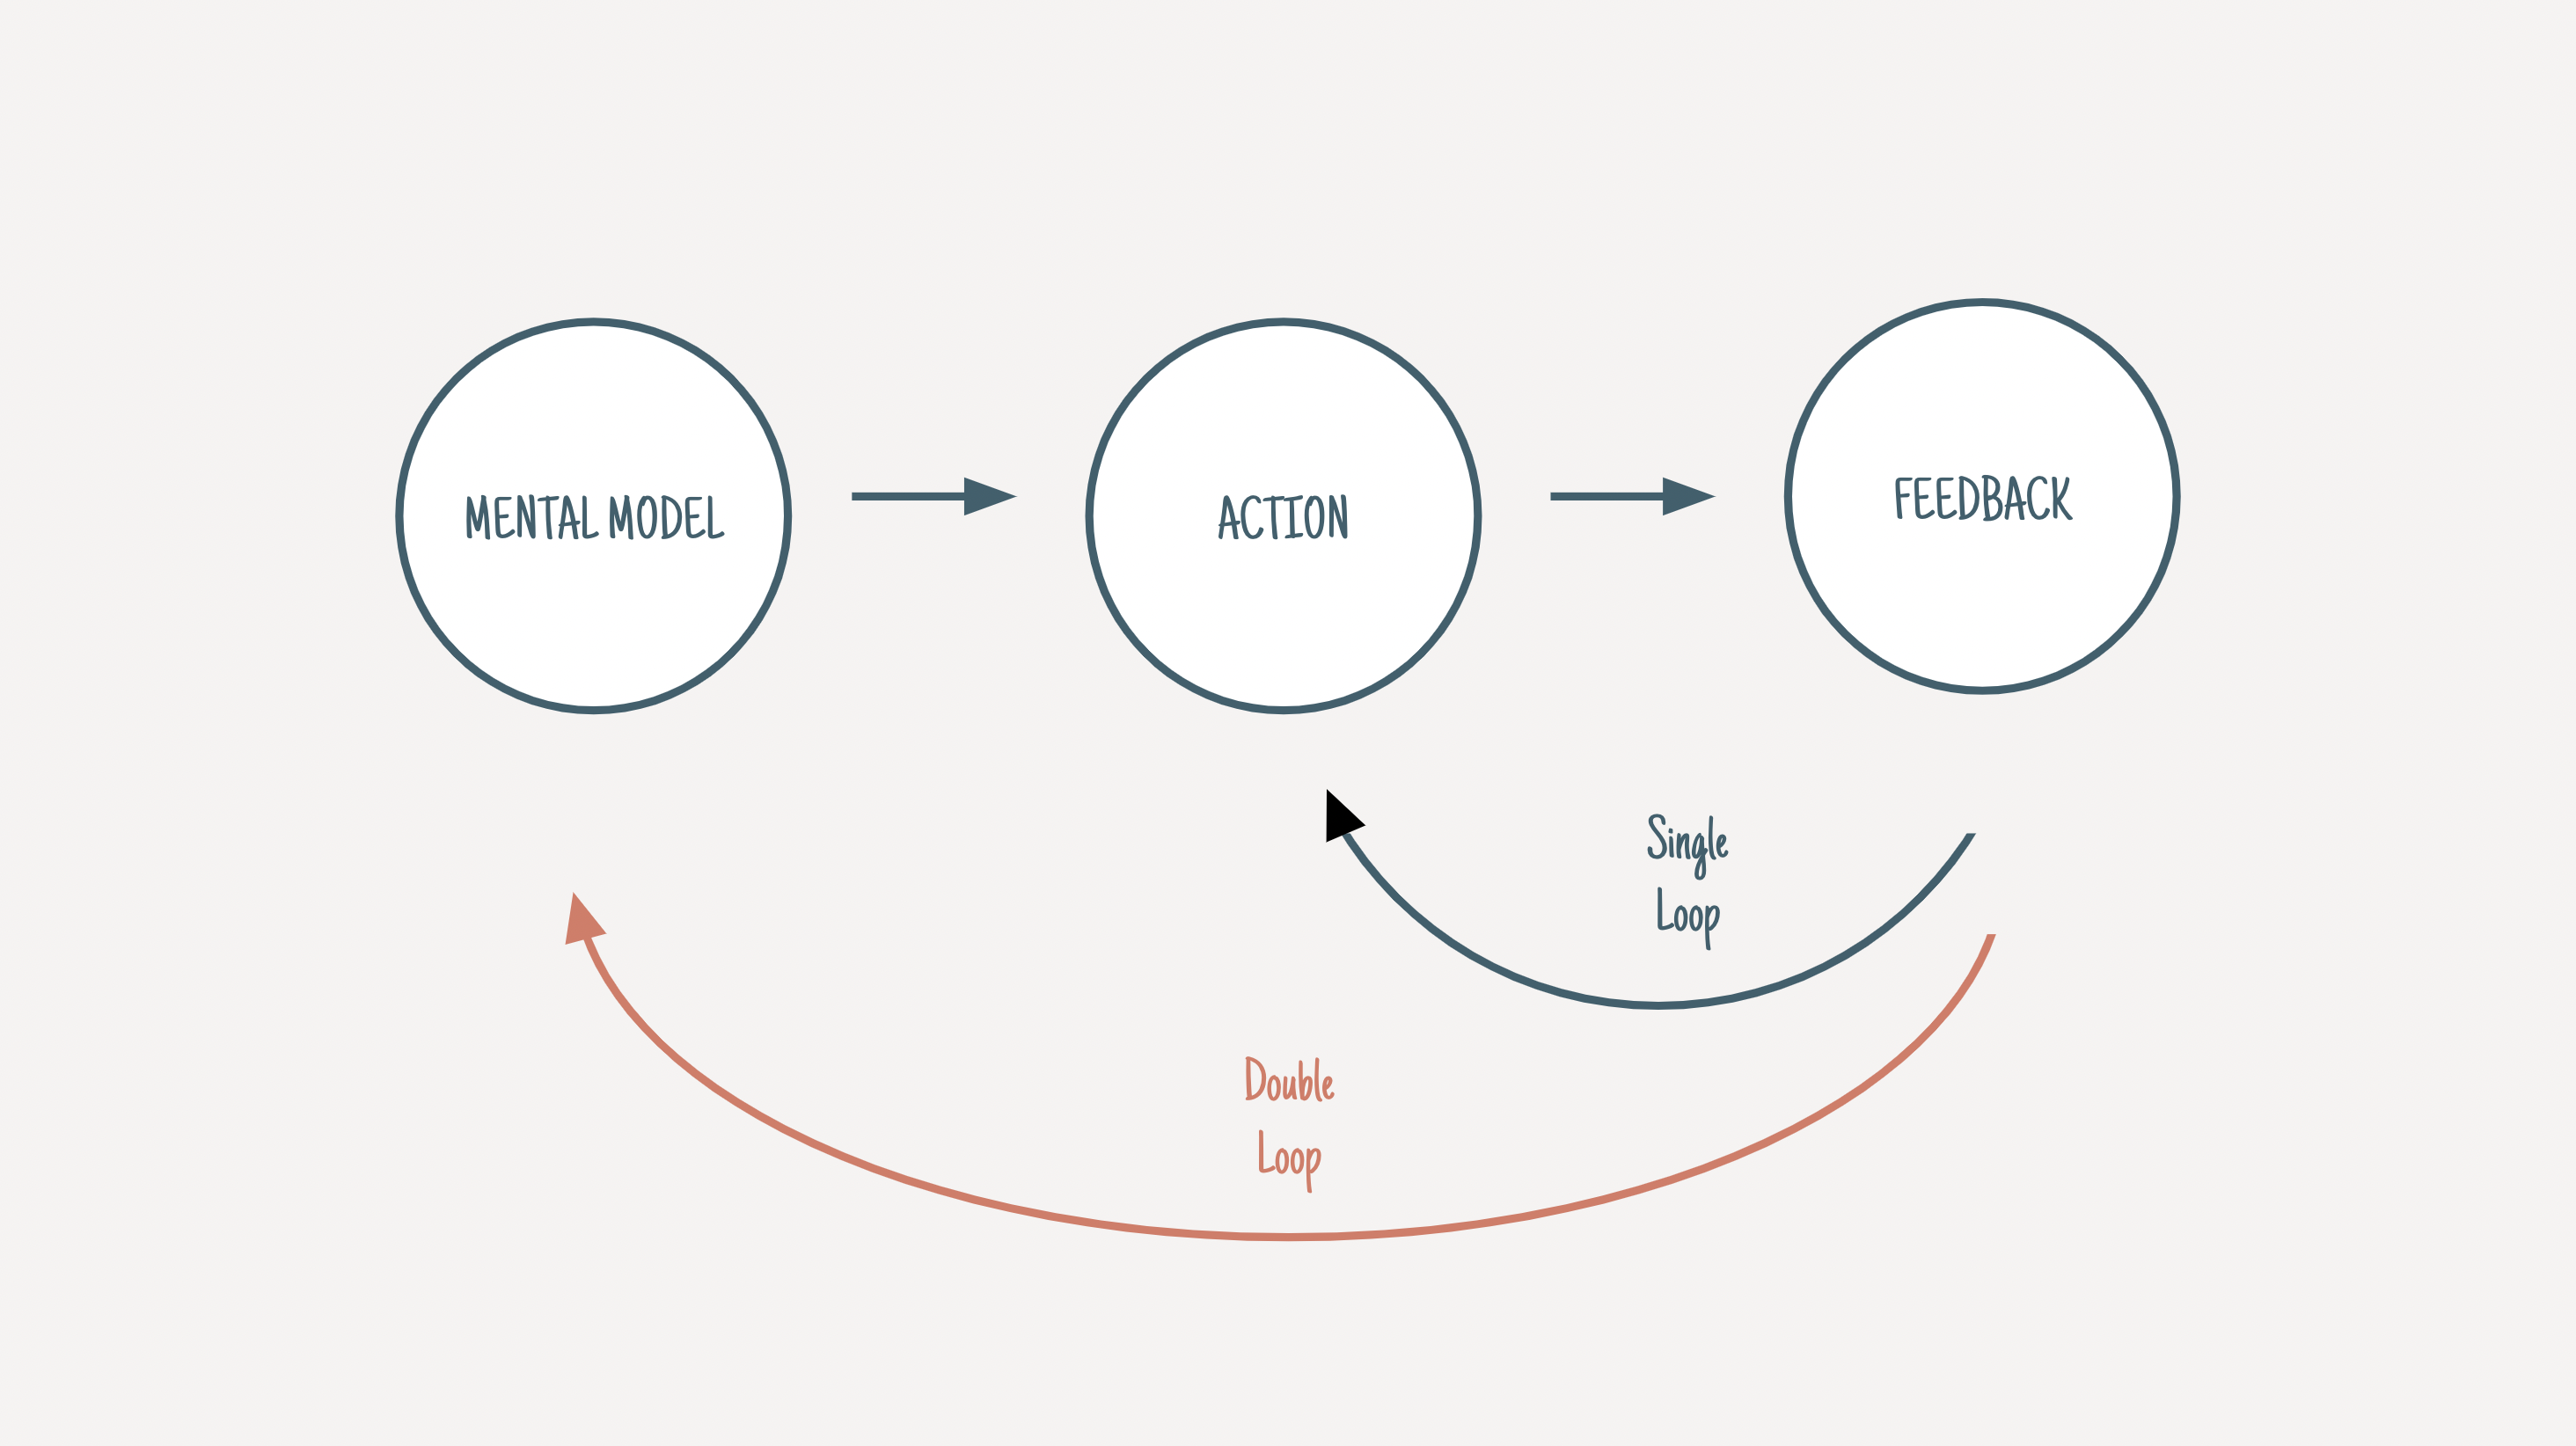 Growth Loops: From linear growth to circular growth - Ness Labs